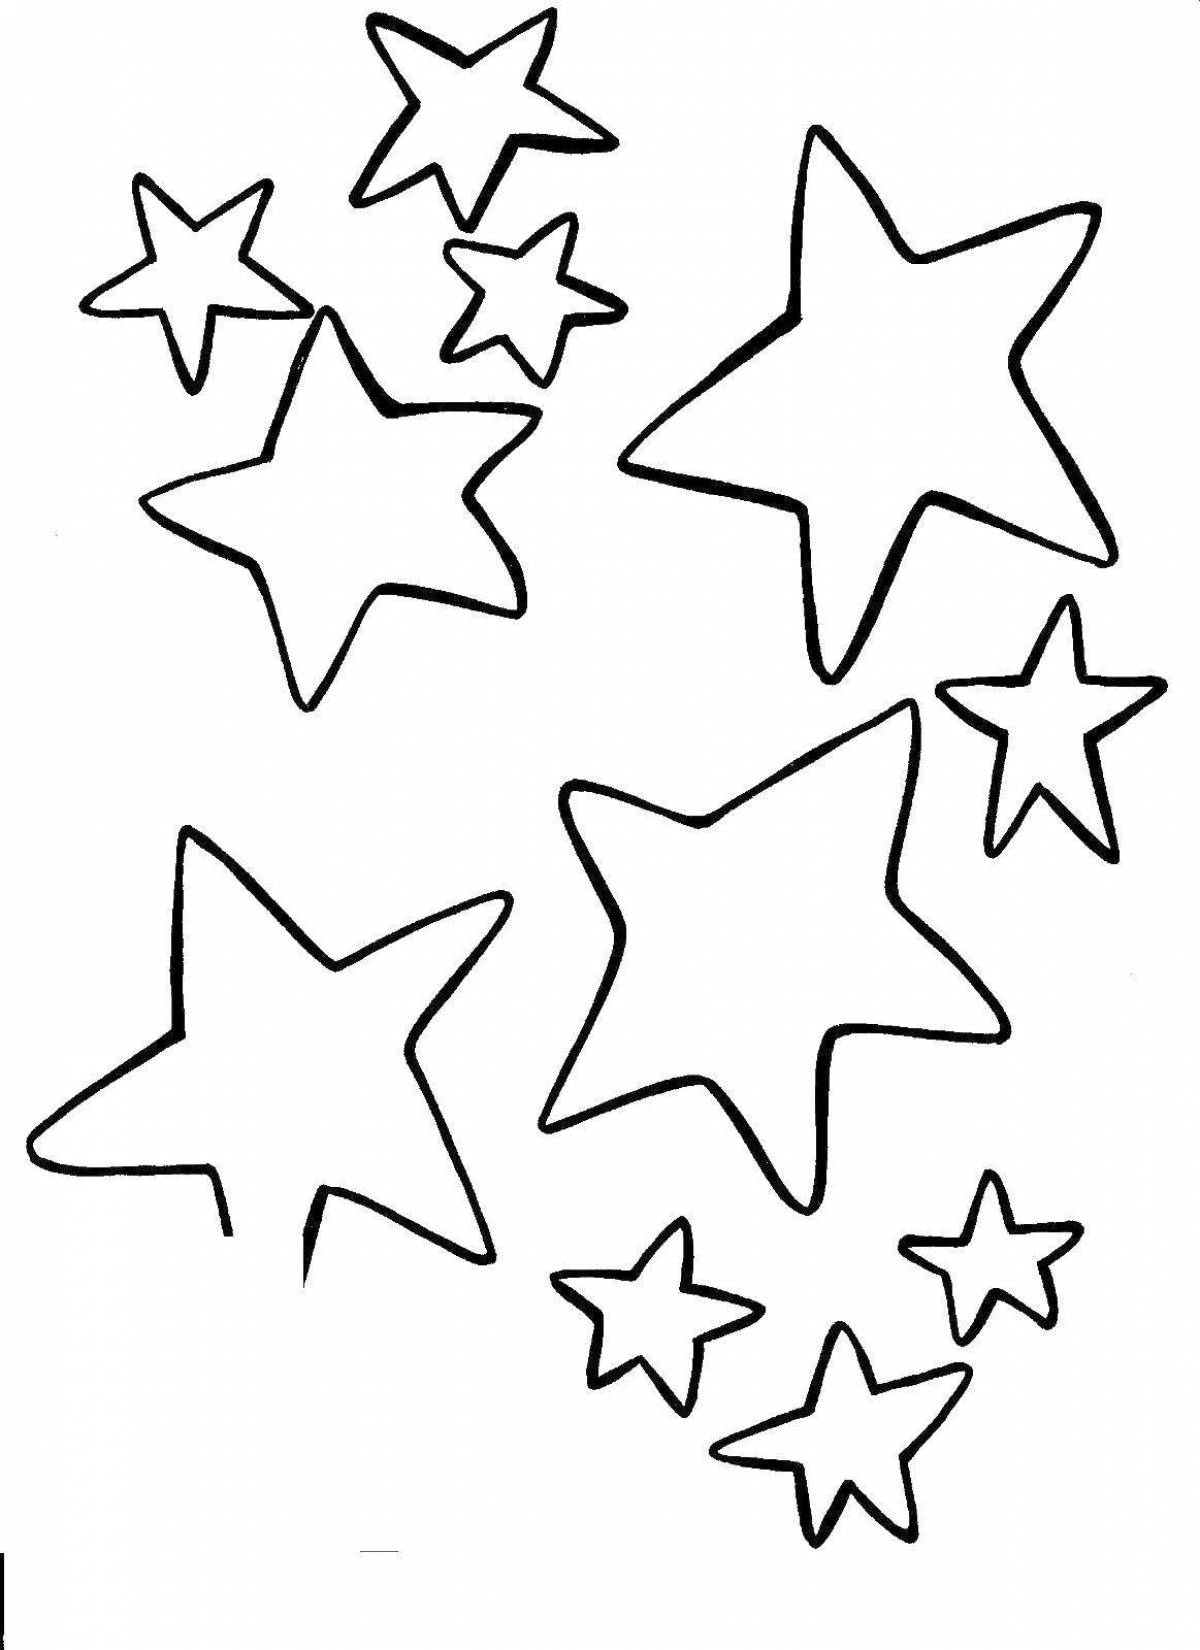 Fancy star coloring page